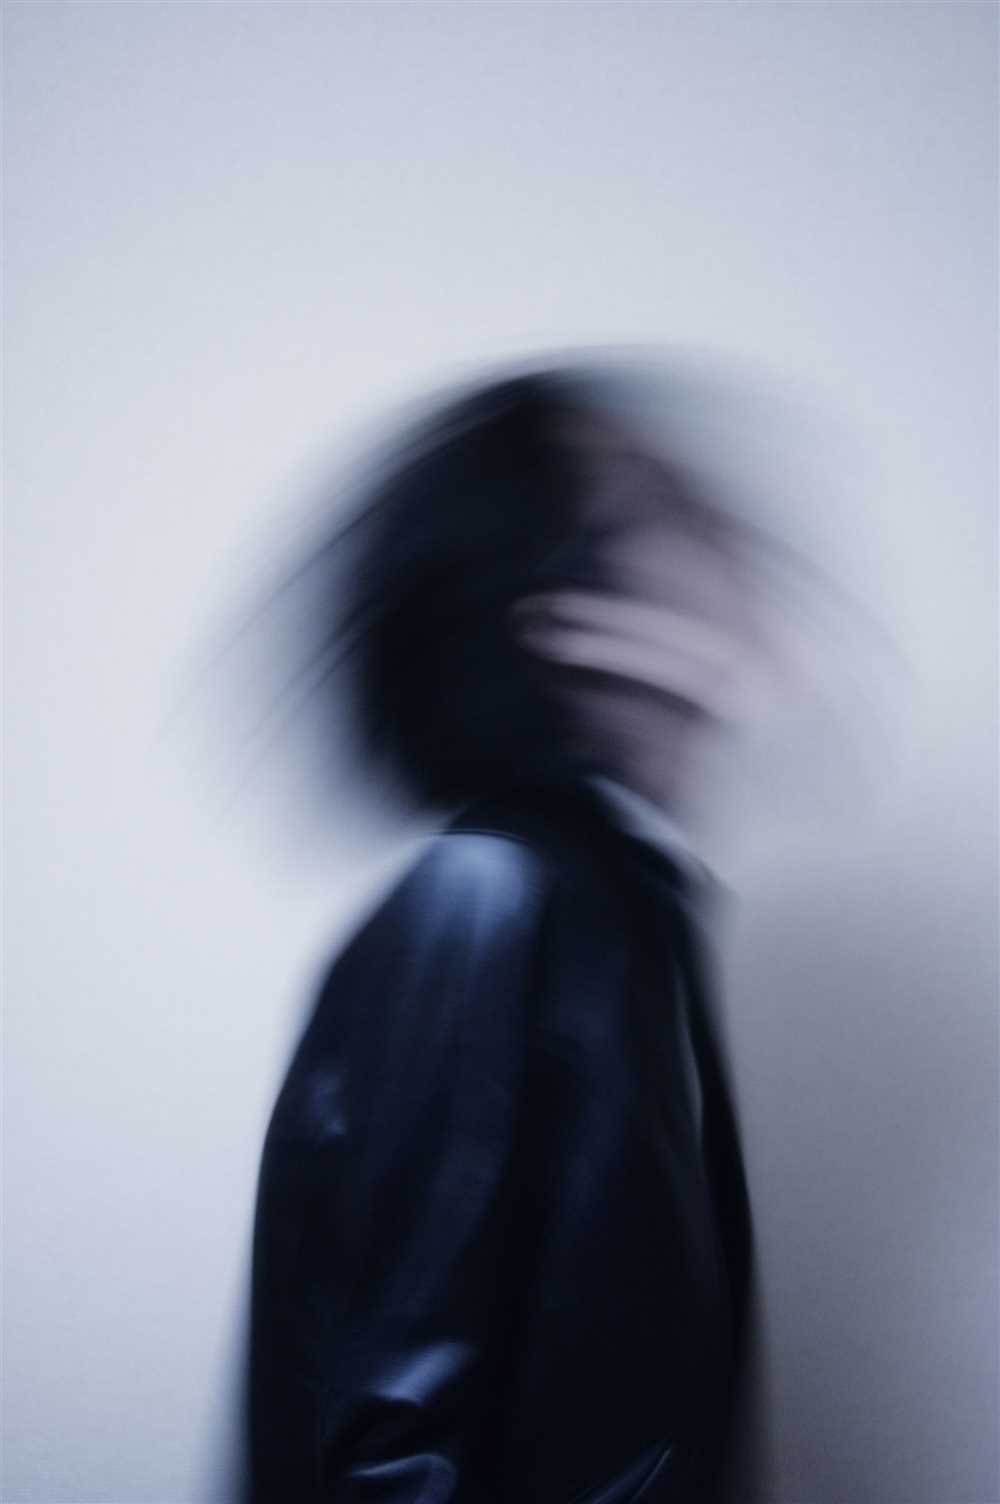 The Creative and Dreamy Aesthetic Appeal of Blurred Photography